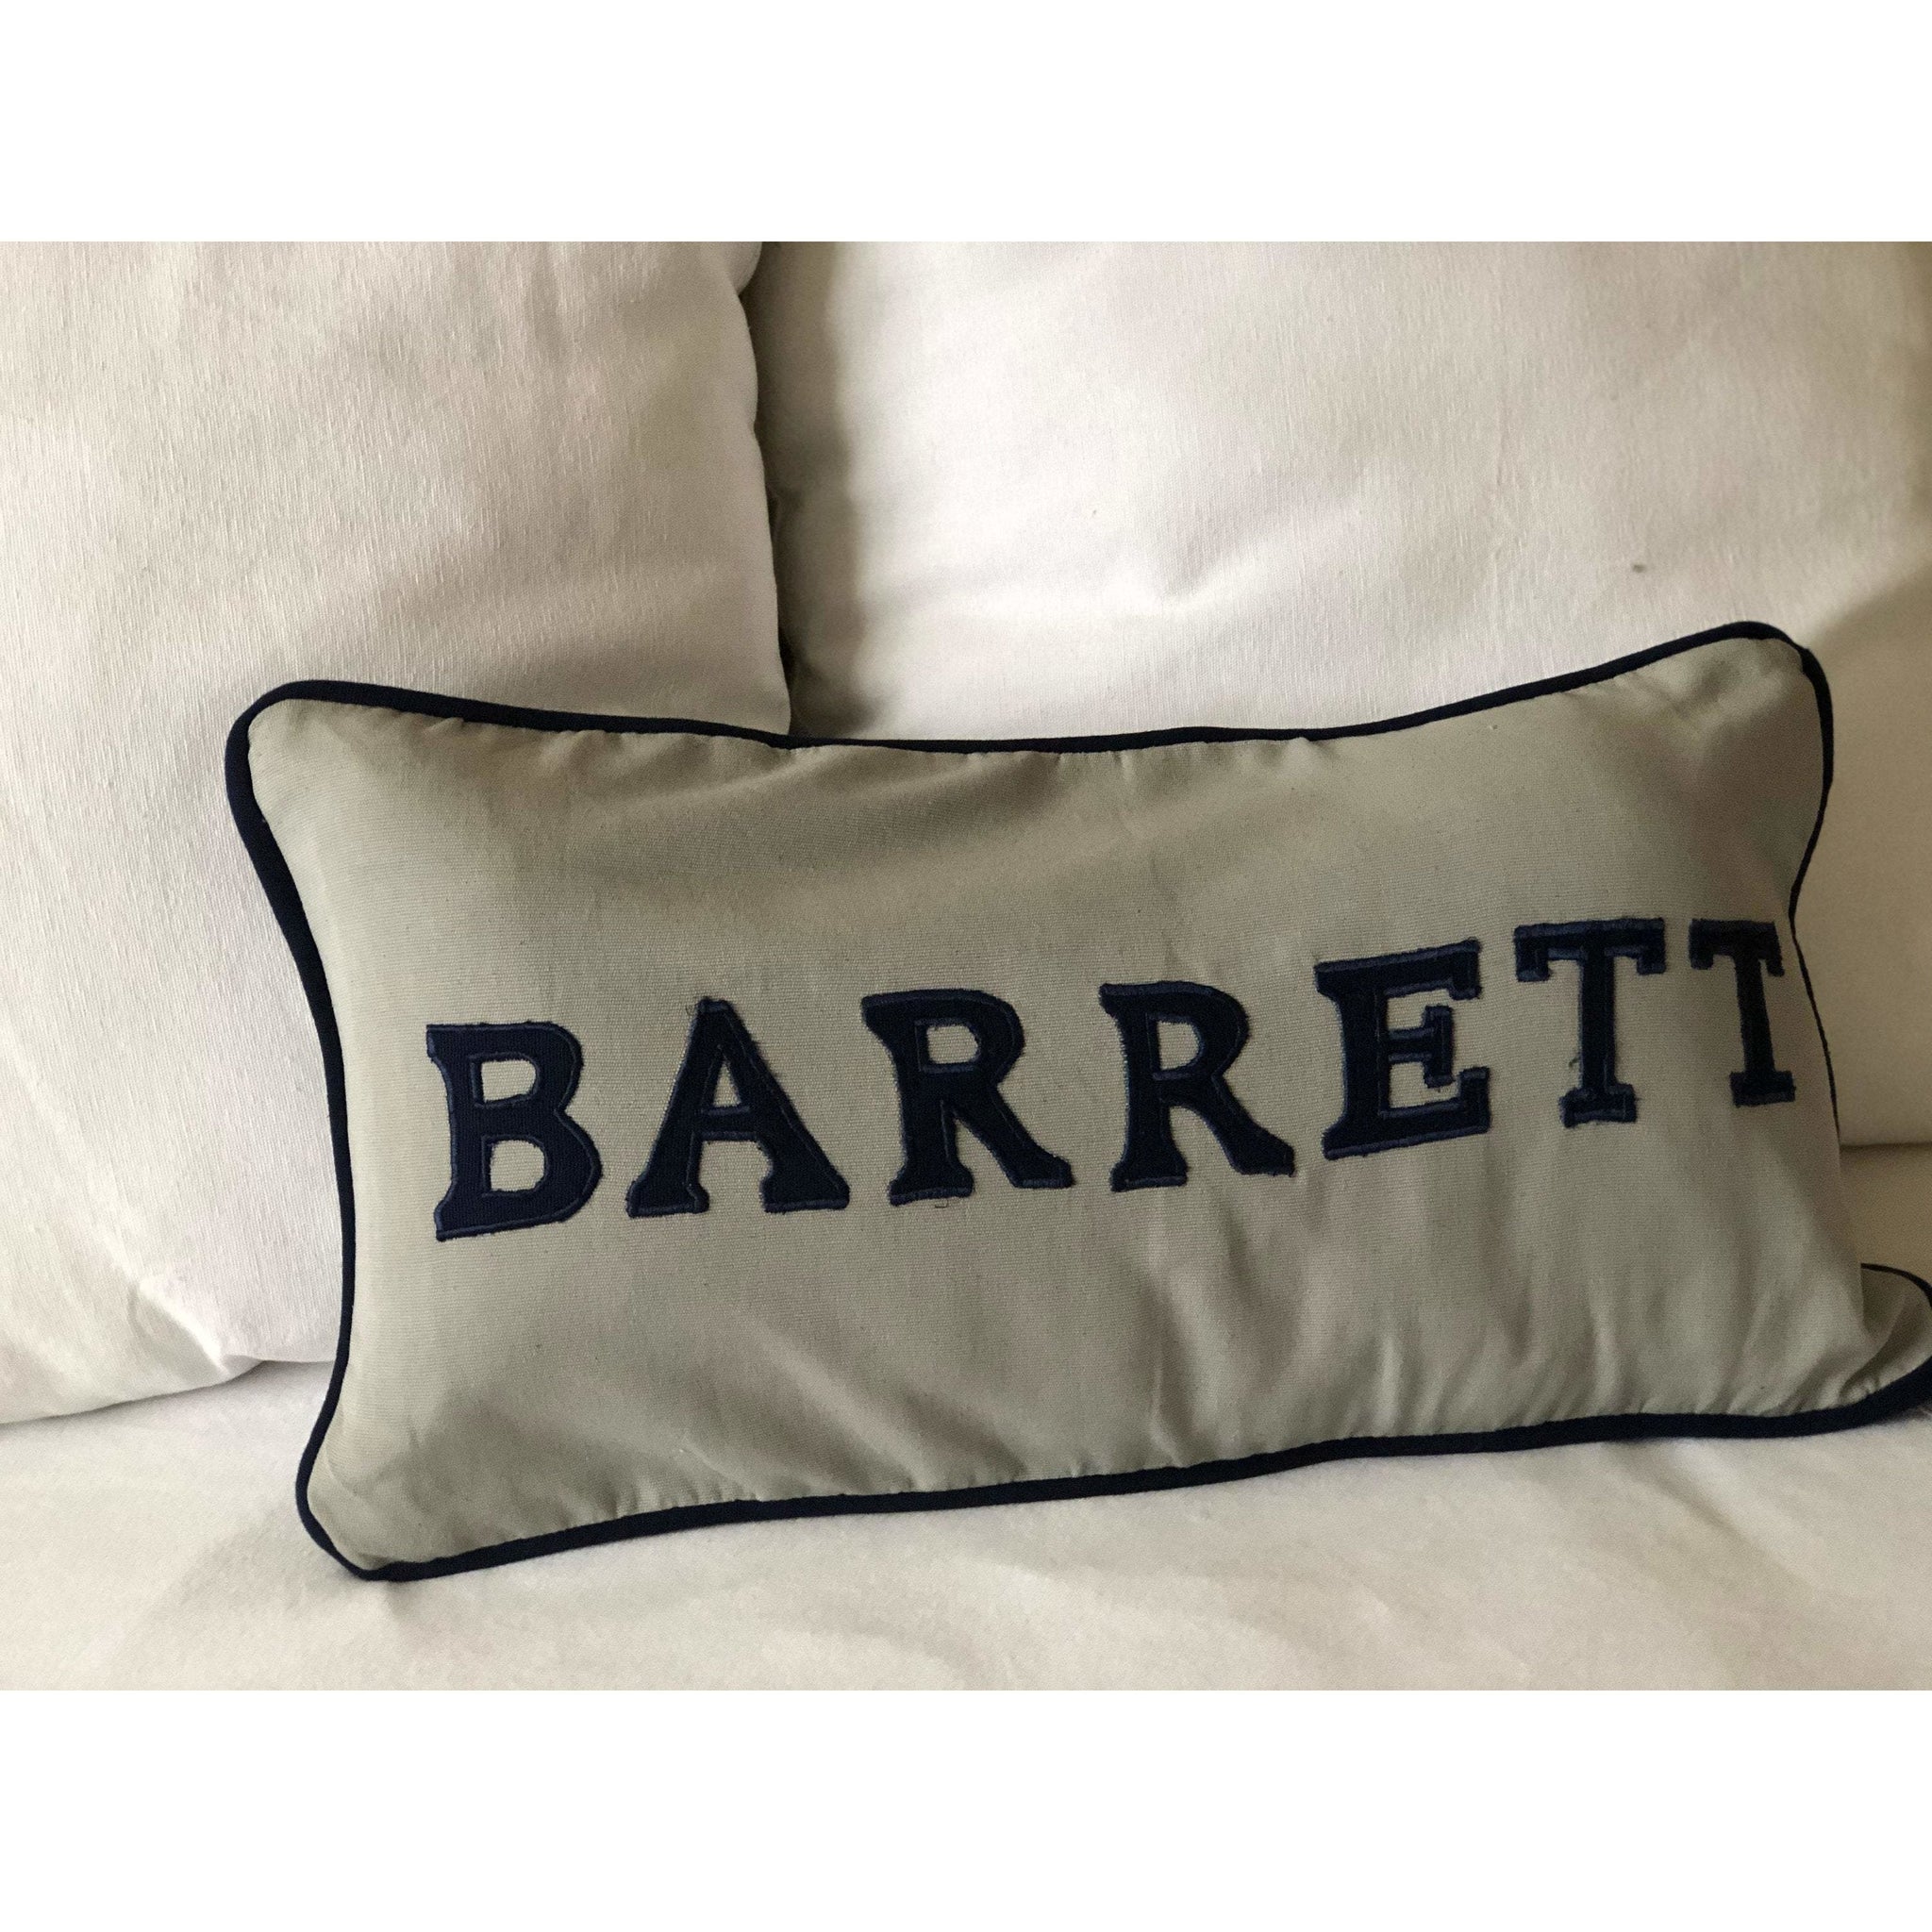 Personalized Name Pillows, Gray Rectangle Pillow Cover